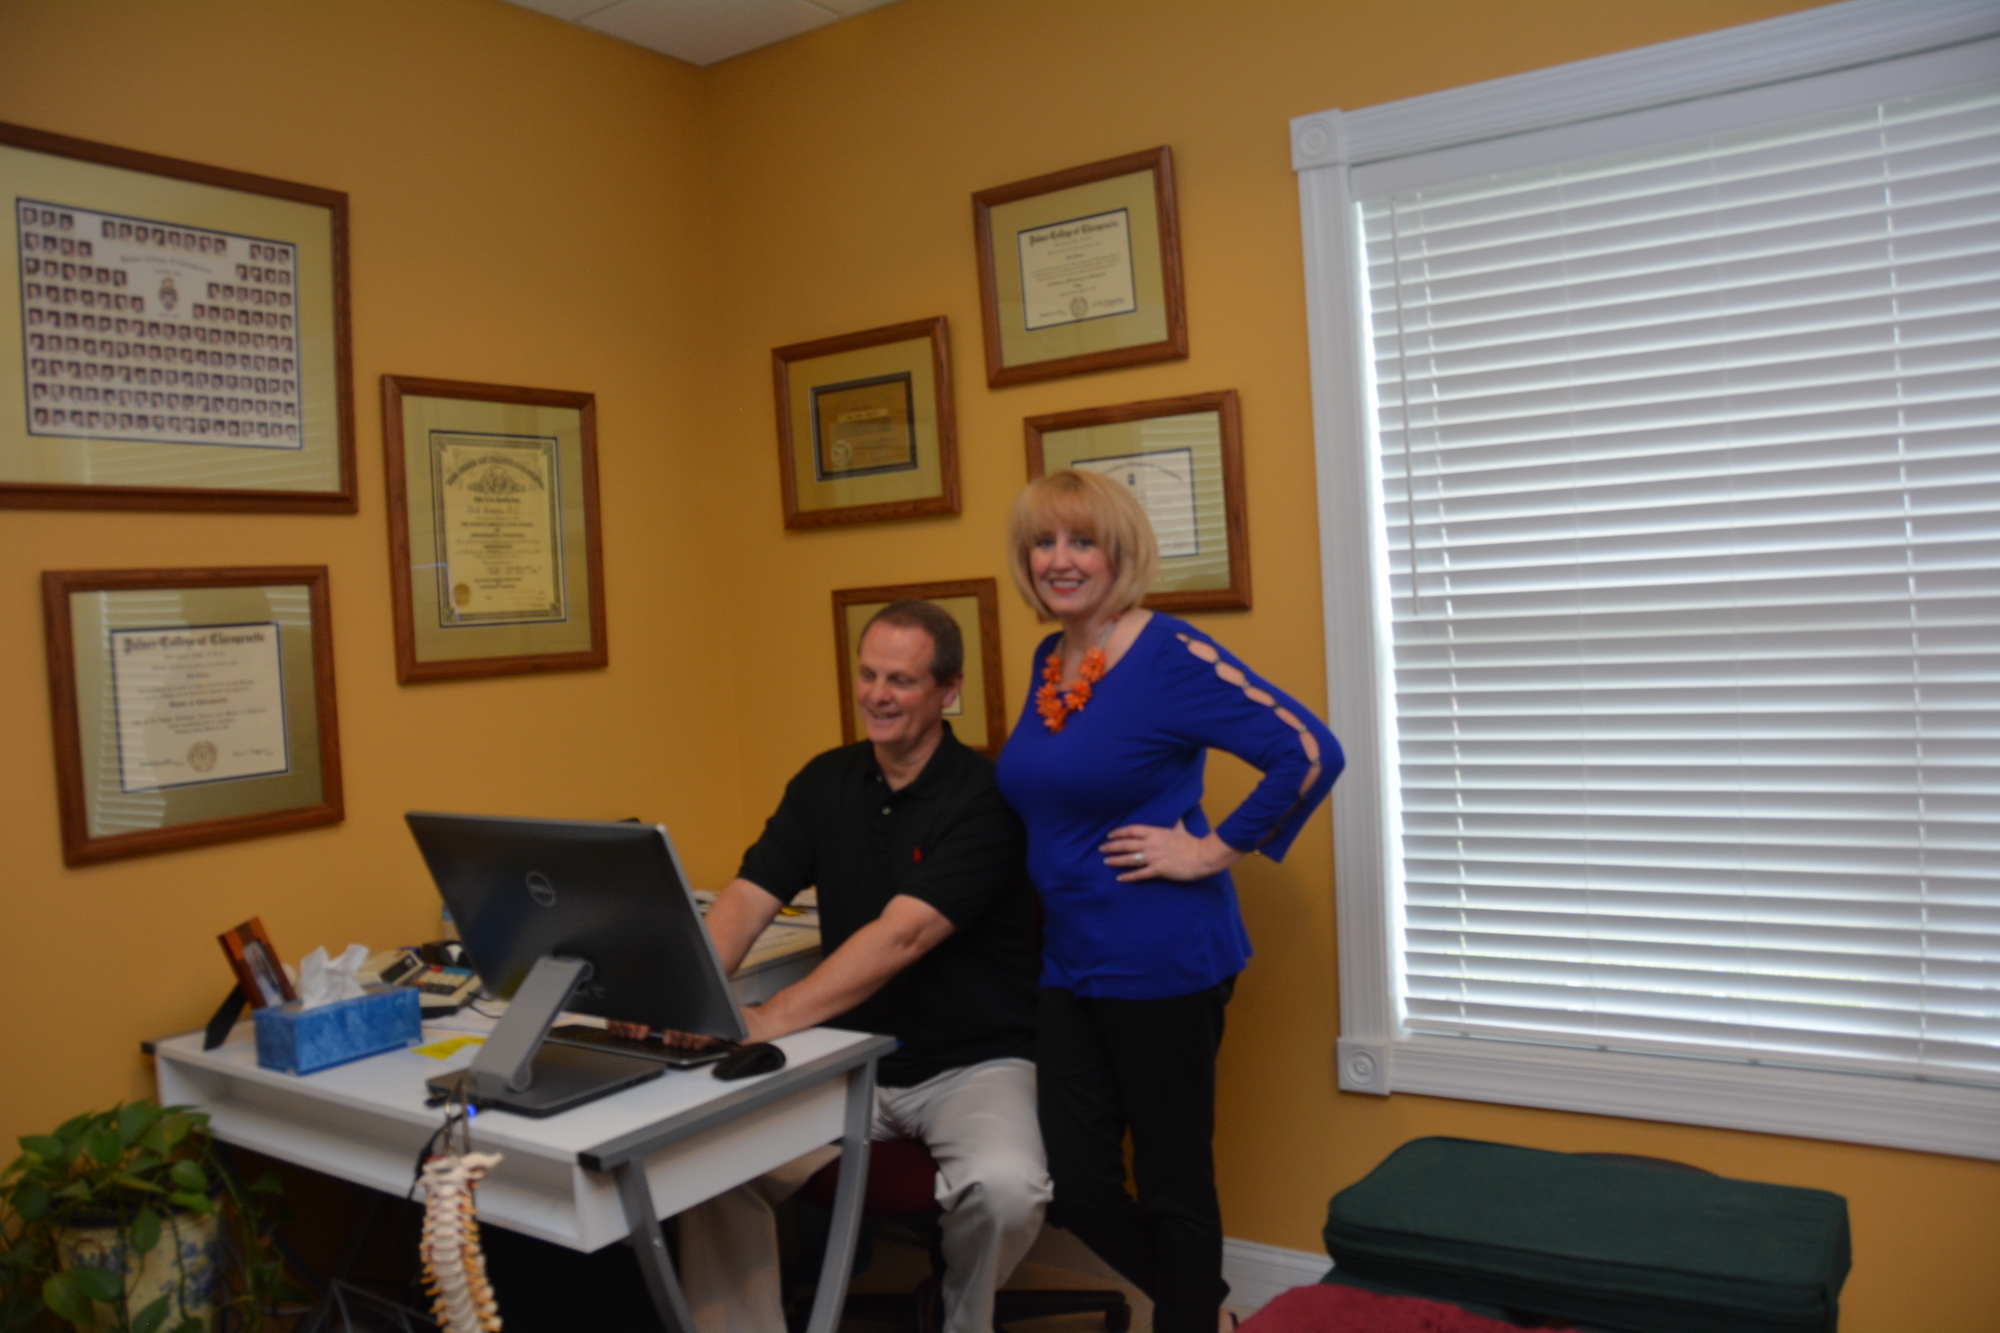 Dr. Dirk Simons and Diane Brinson check out their new Patient Software